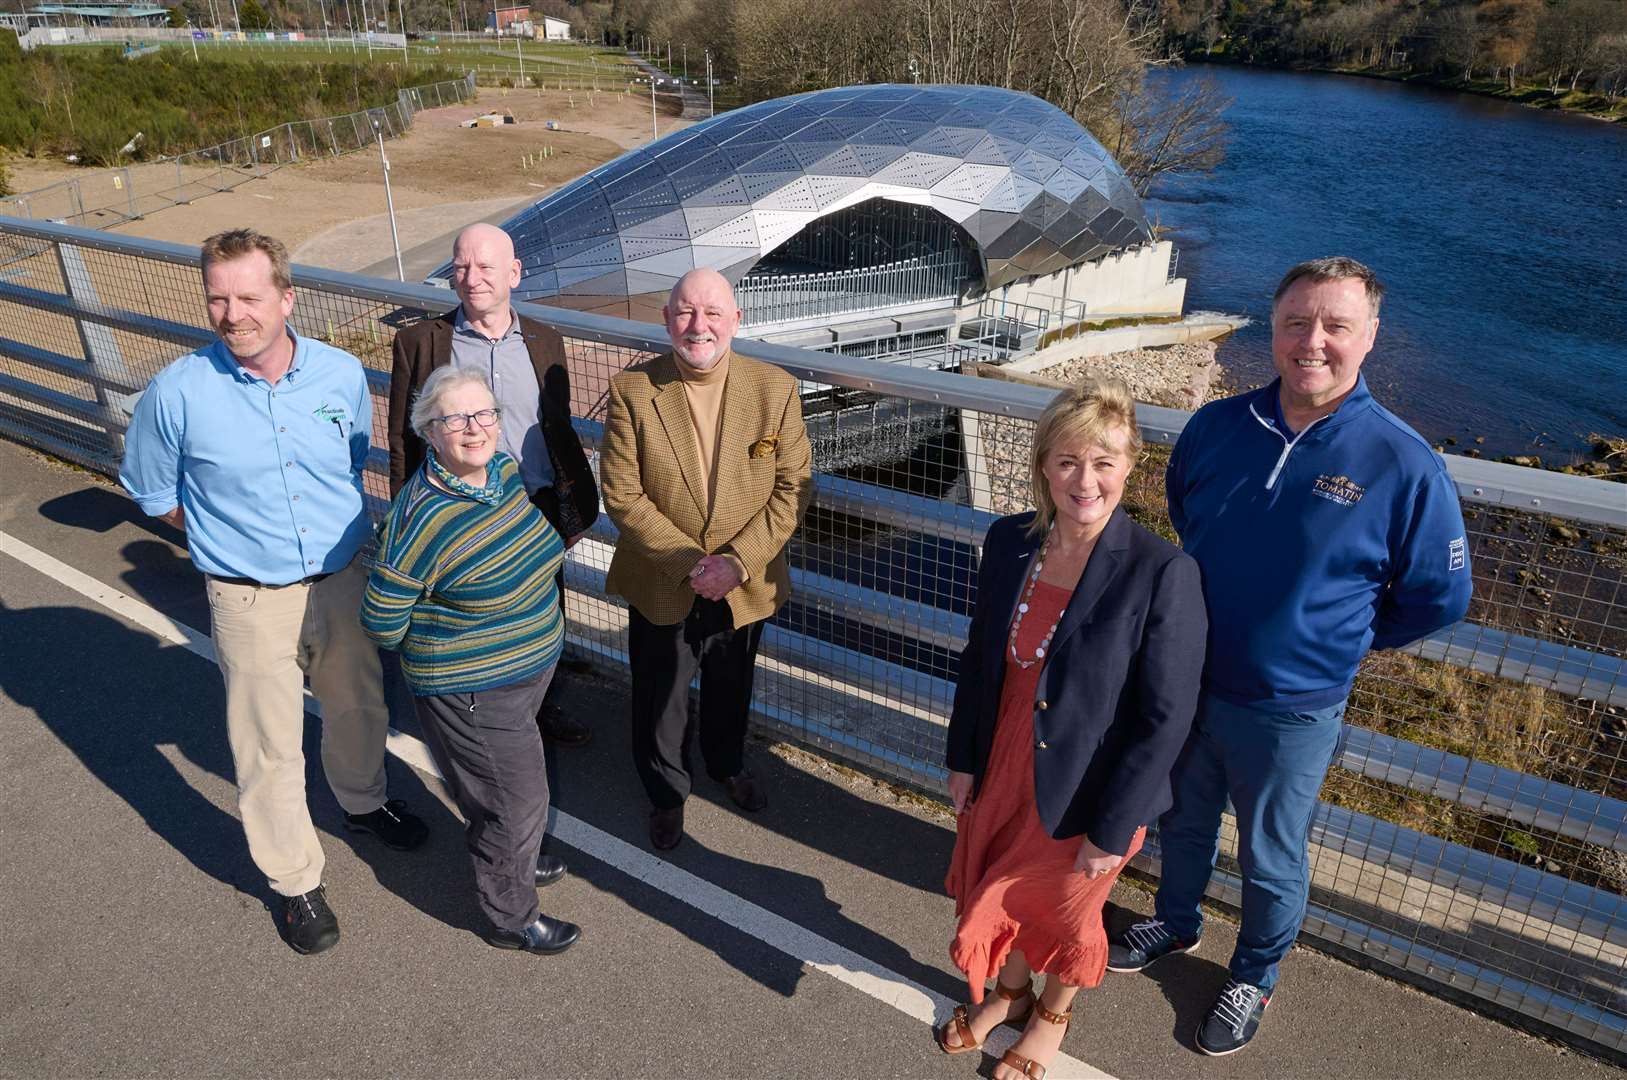 Members of Highland Tourism’s new Climate Positive Leadership Group, from left, Archie Prentice, Jane Cumming, George Baxter, Willie Cameron, Yvonne Crook, and Peter Kane.